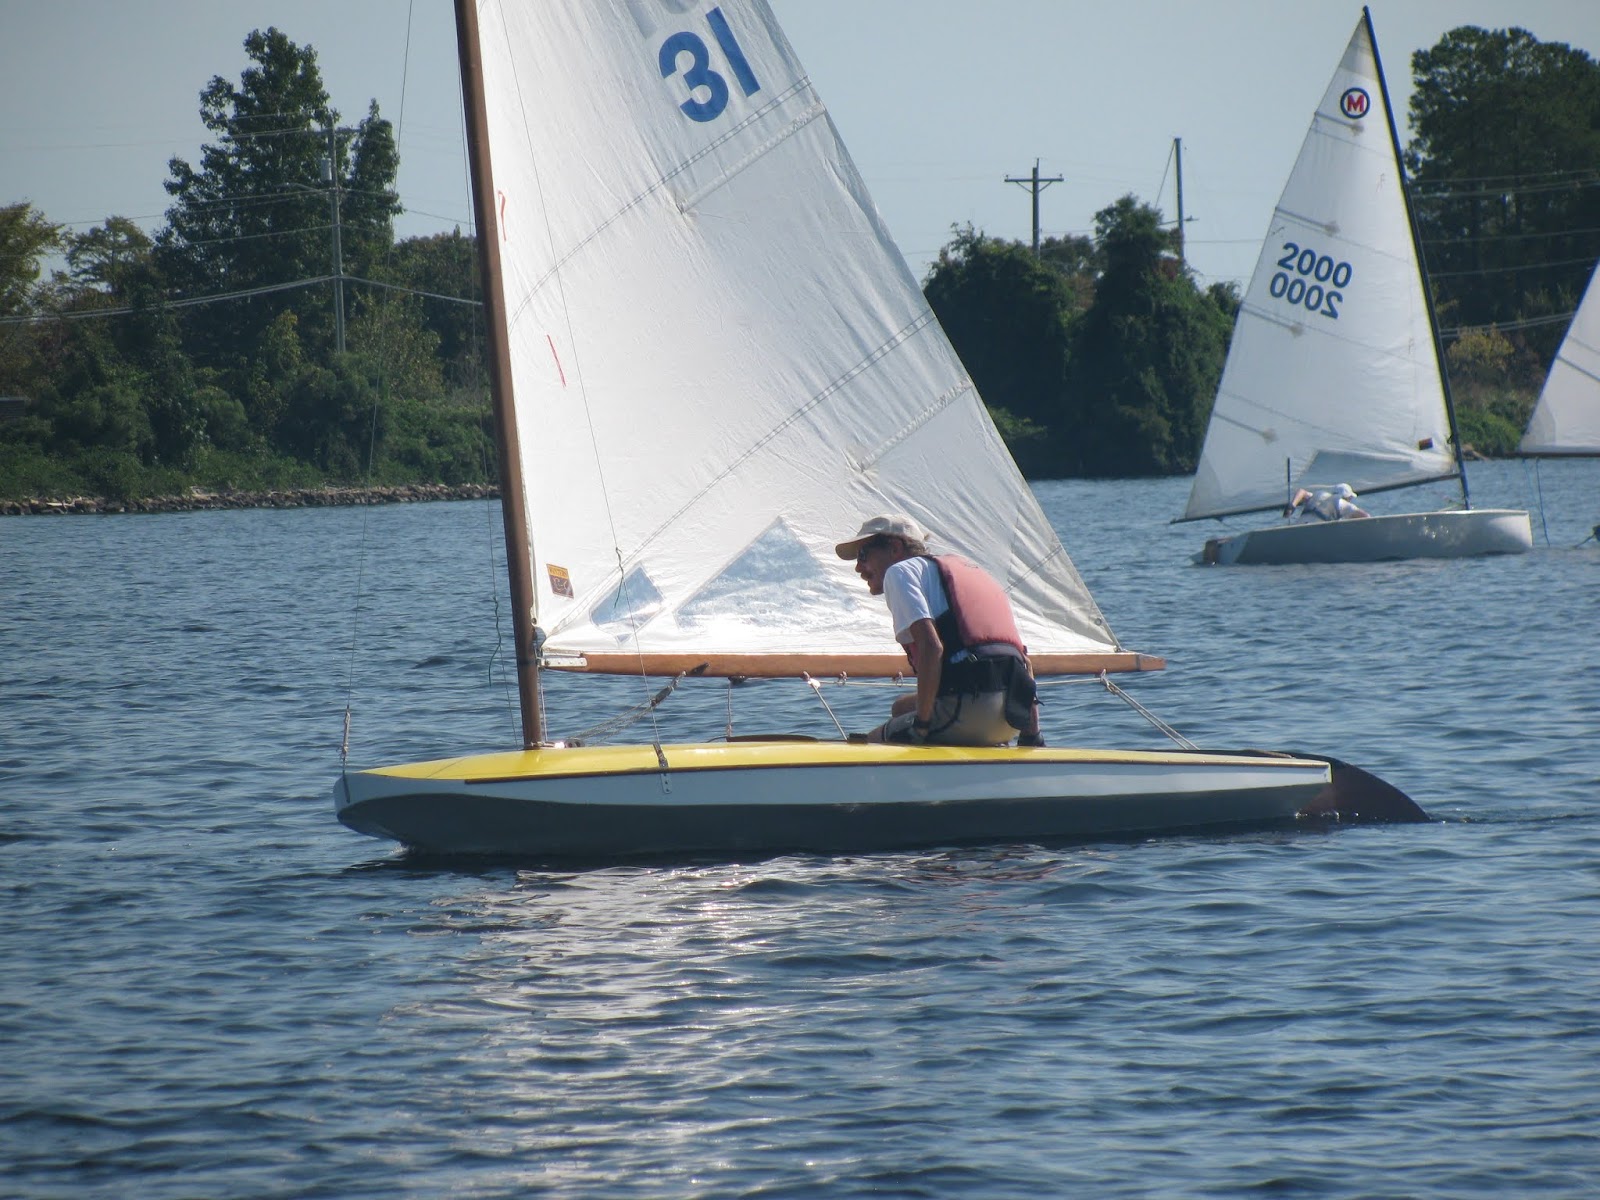 moth sailboat for sale canada